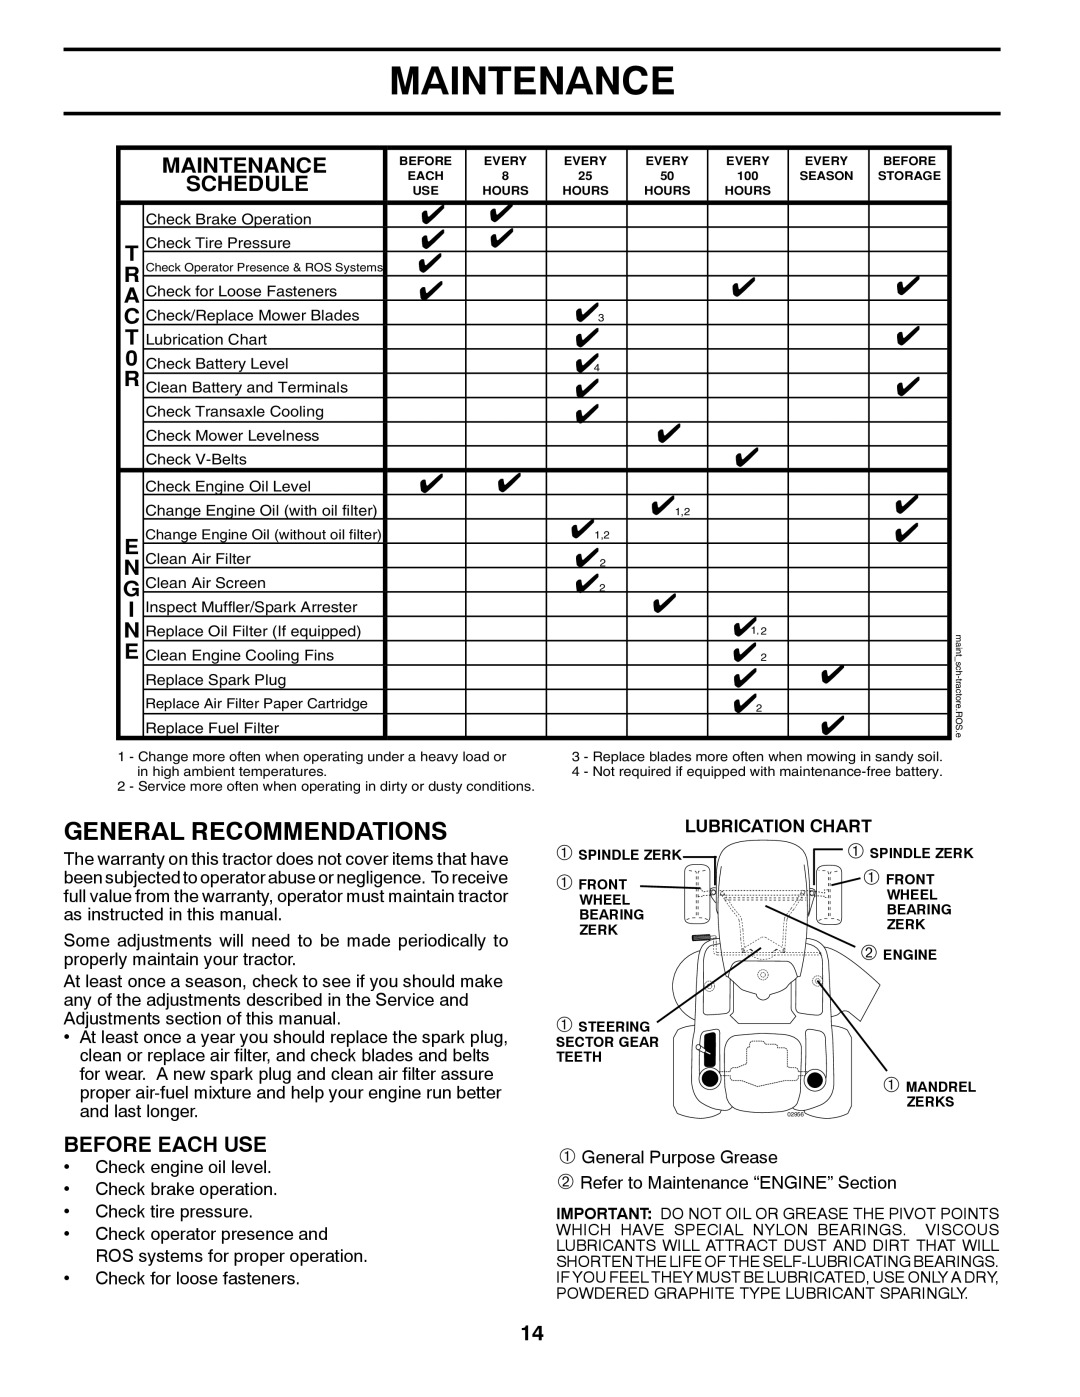 Husqvarna GTH2648 owner manual Maintenance, General Recommendations, Schedule, Before Each Use 